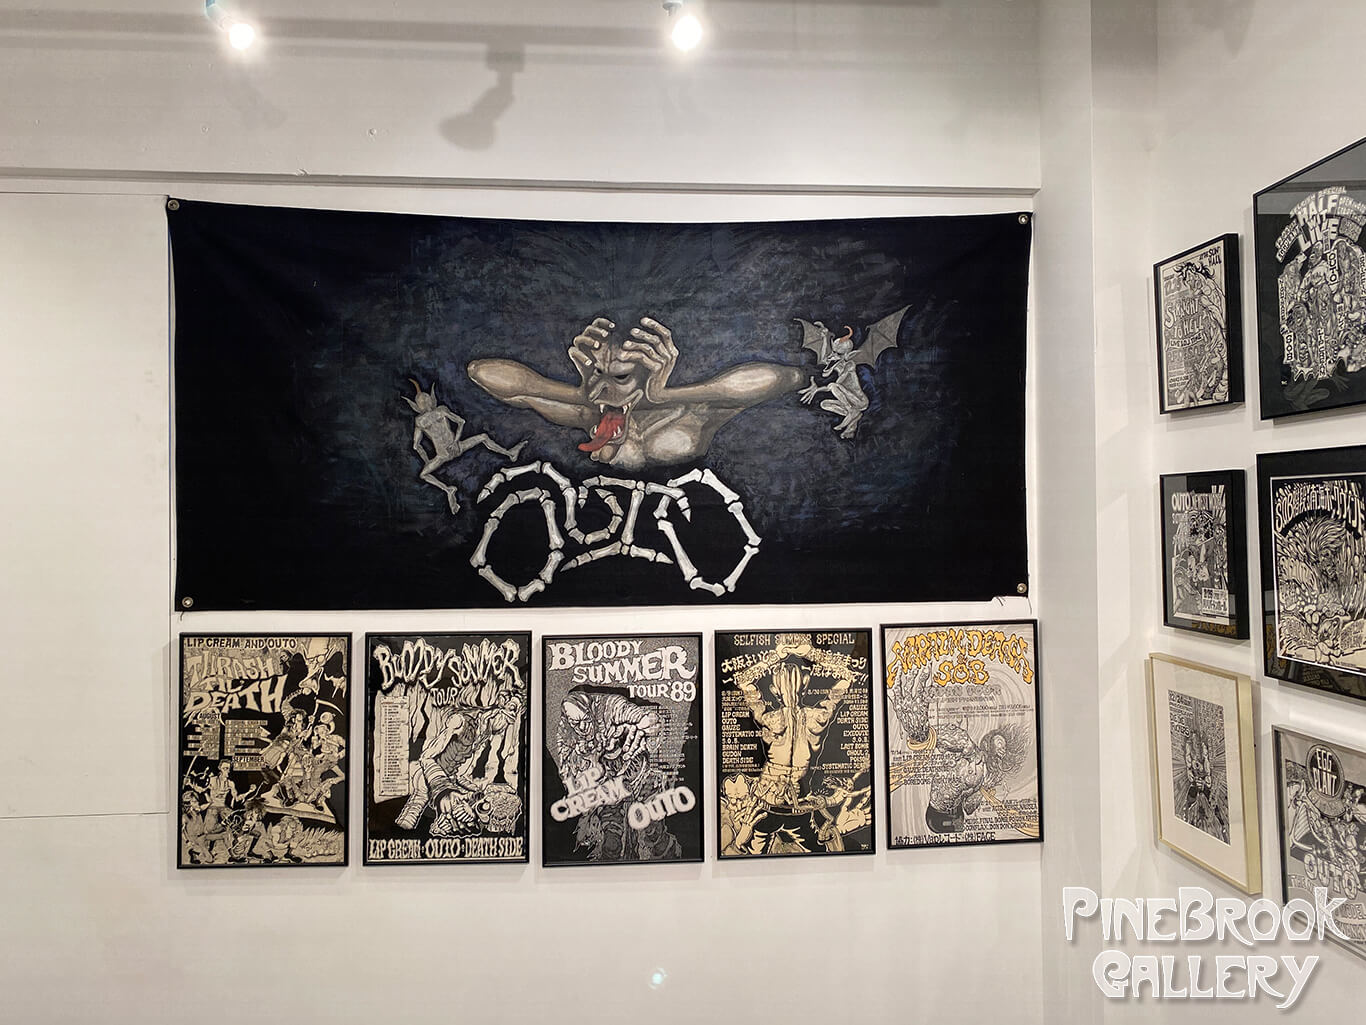 TOM原画展 at Pinebrook Gallery